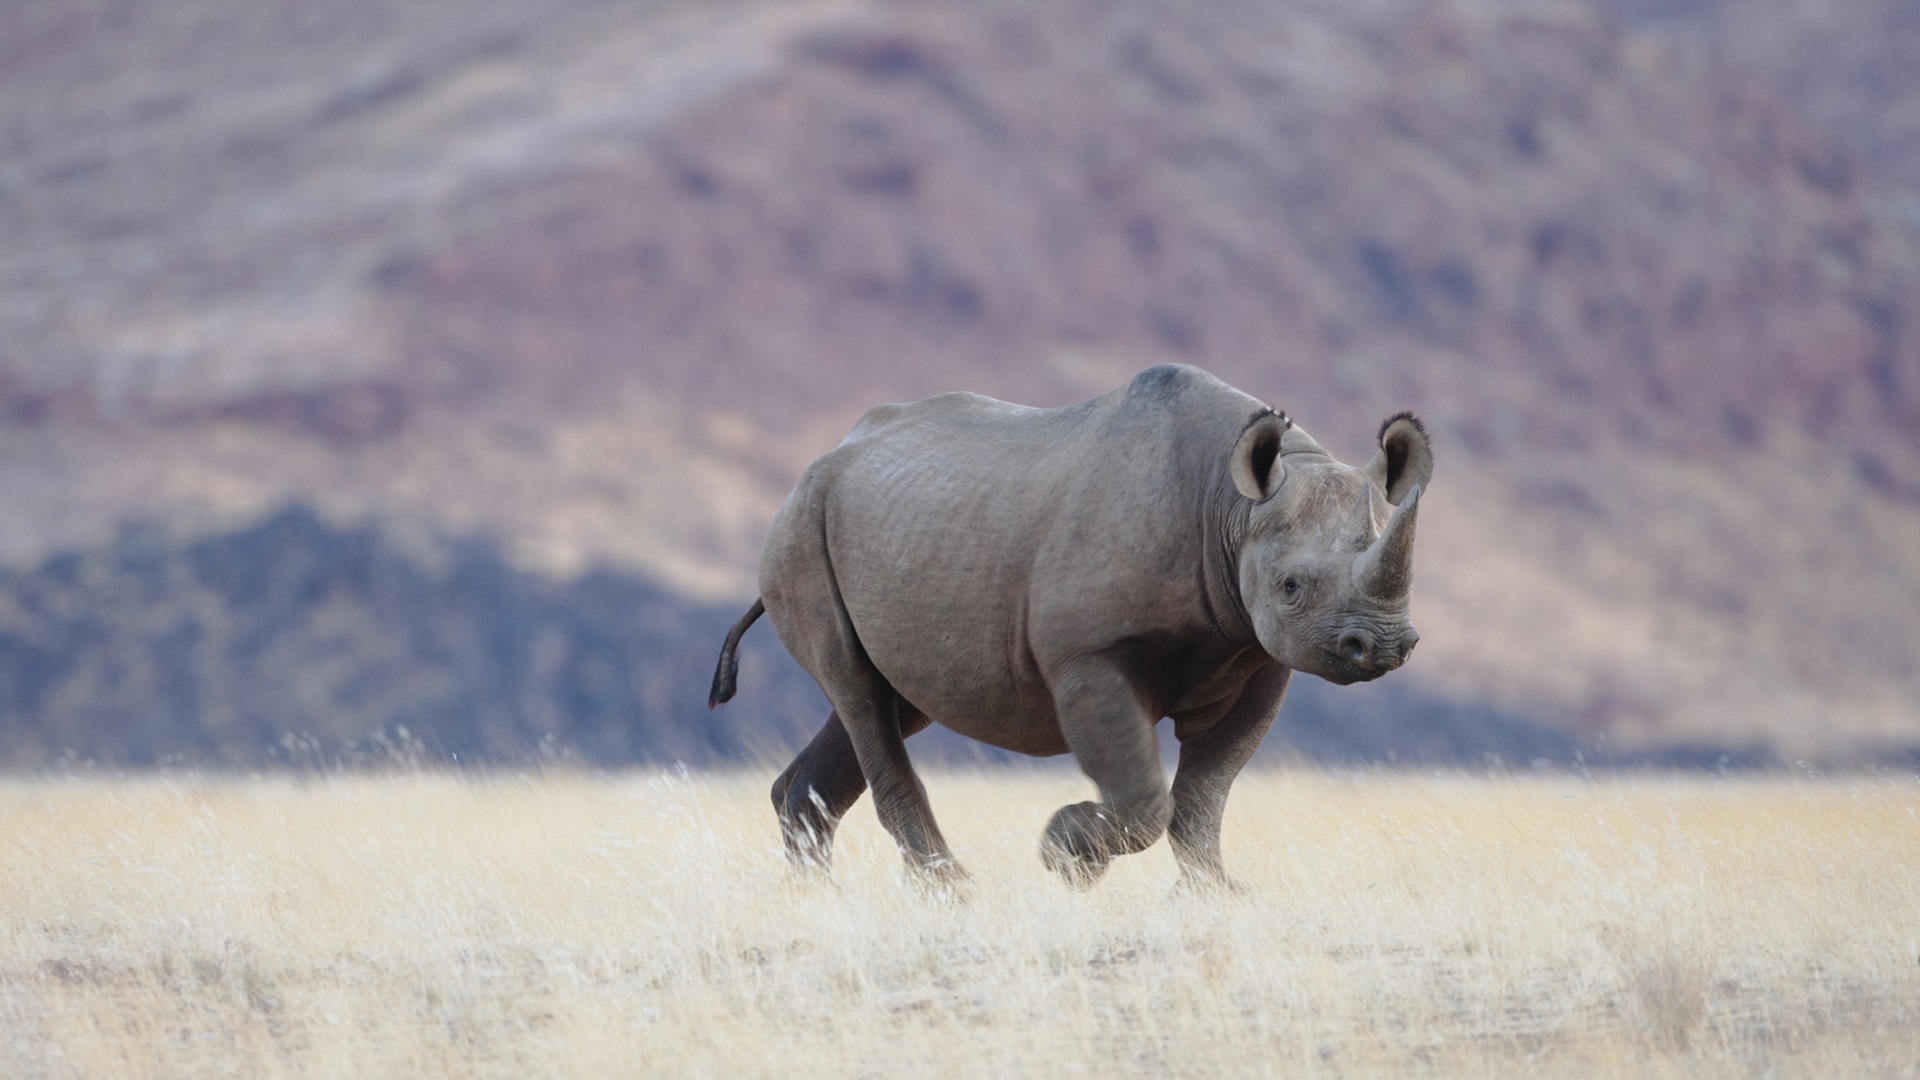 A high-tech battle to protect the black rhino